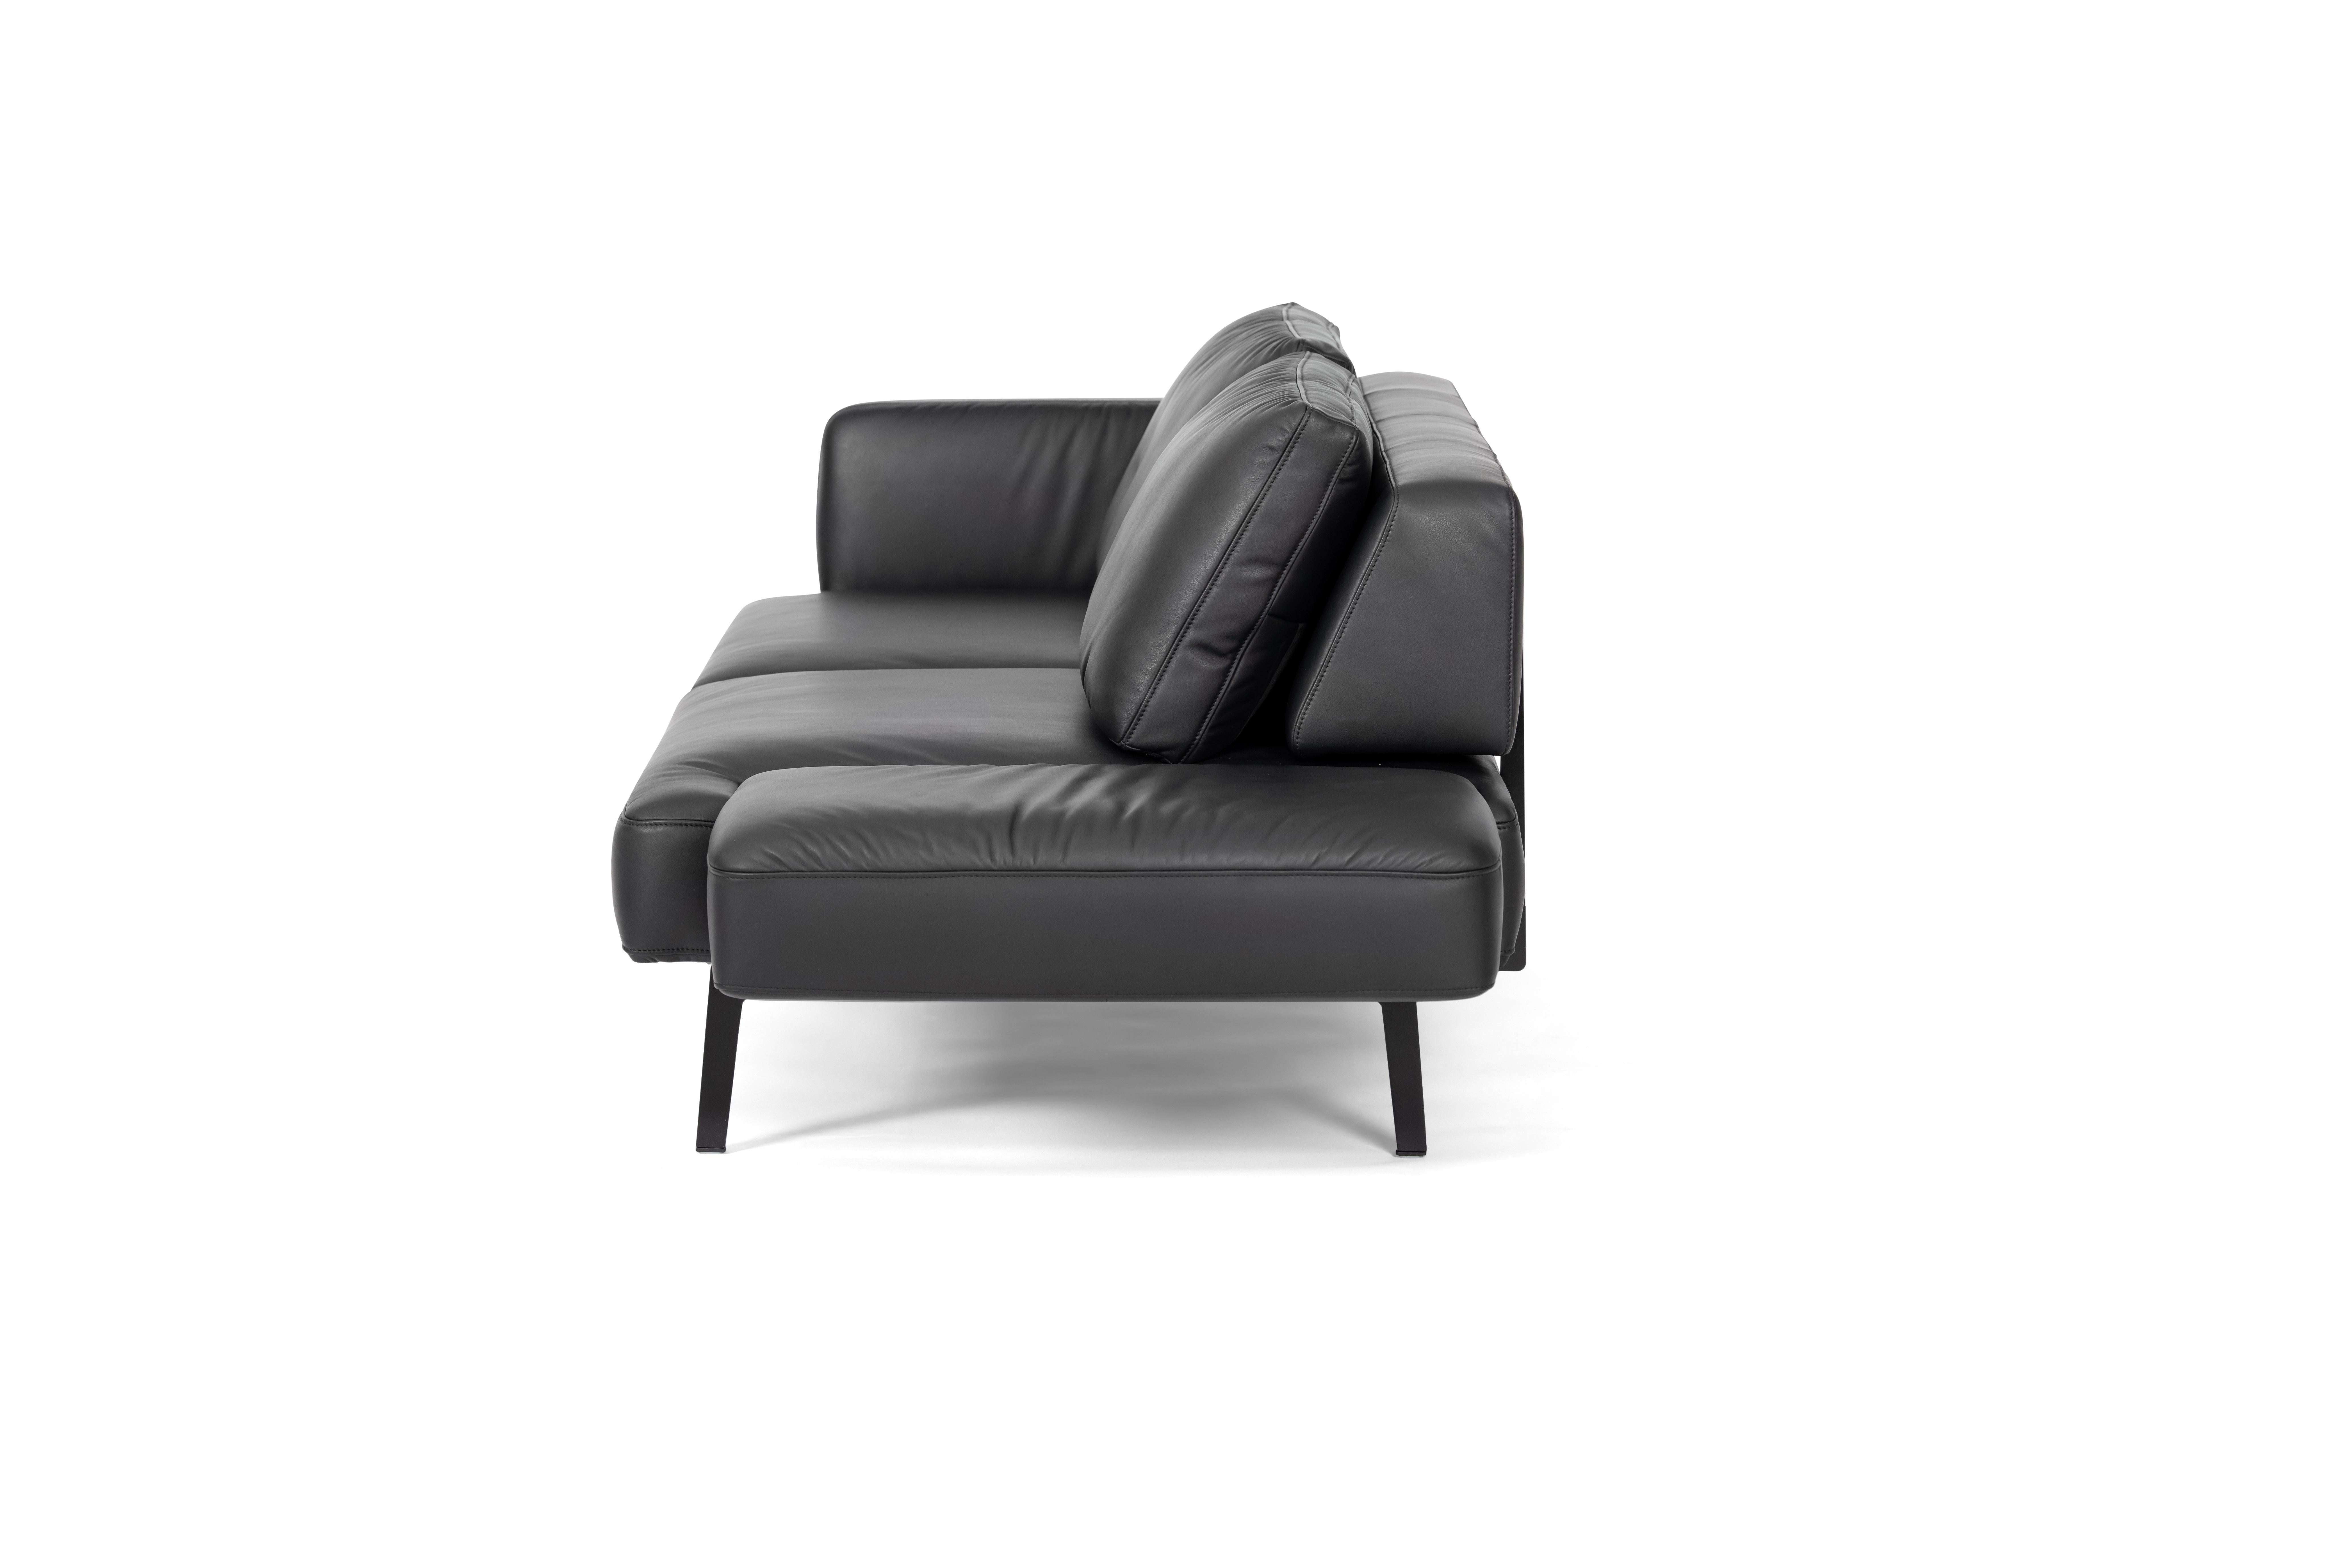 DeSede DS-747/02 Multifunctional Sofa in Black Leather Seat and Back Upholstery For Sale 2